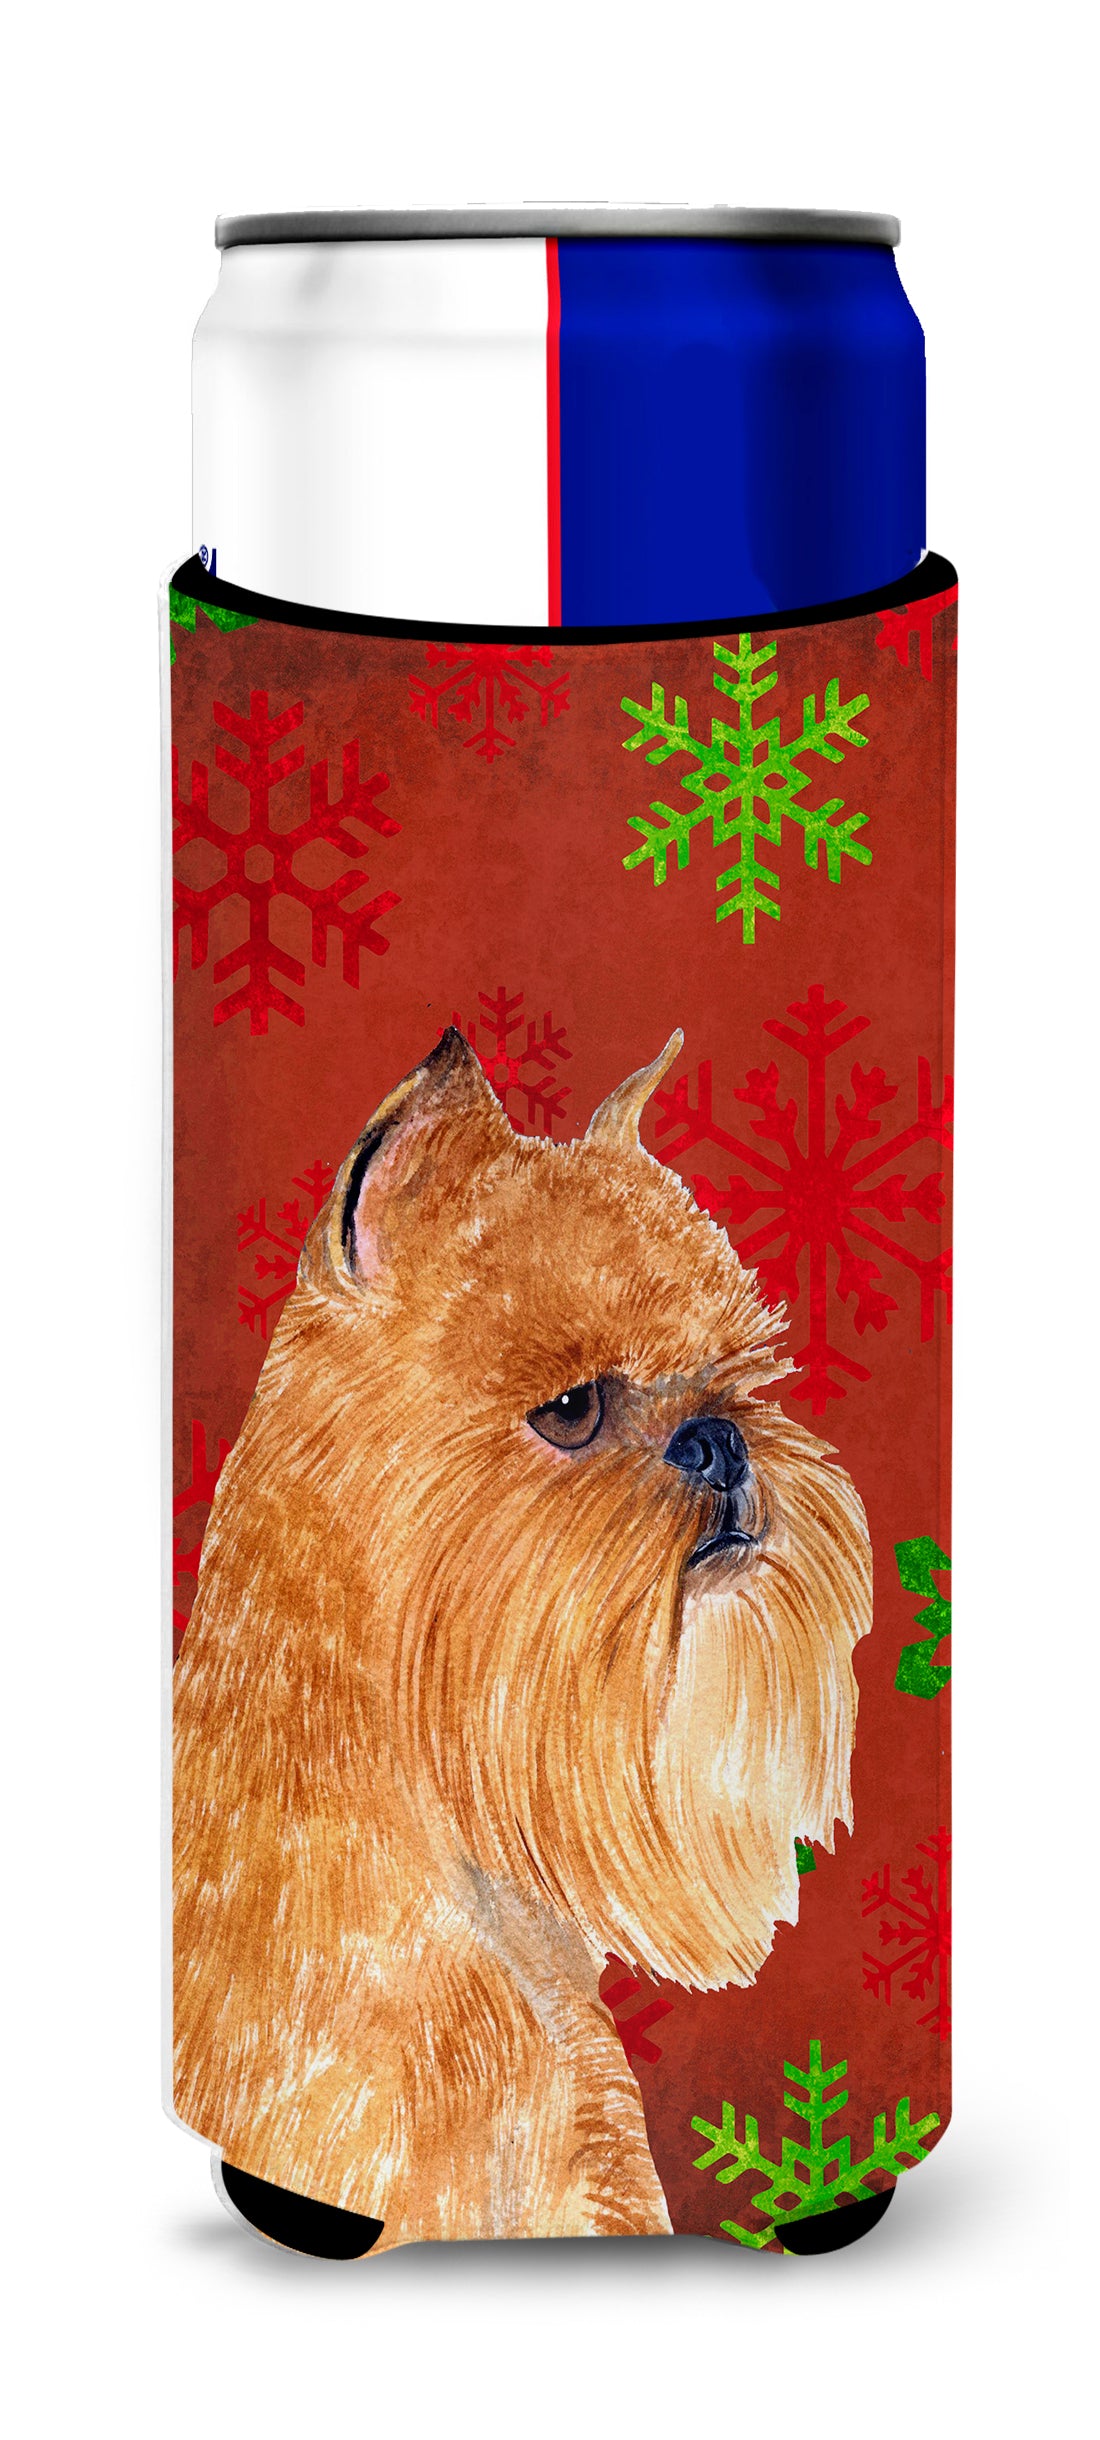 Brussels Griffon Red and Green Snowflakes Holiday Christmas Ultra Beverage Insulators for slim cans SS4701MUK.